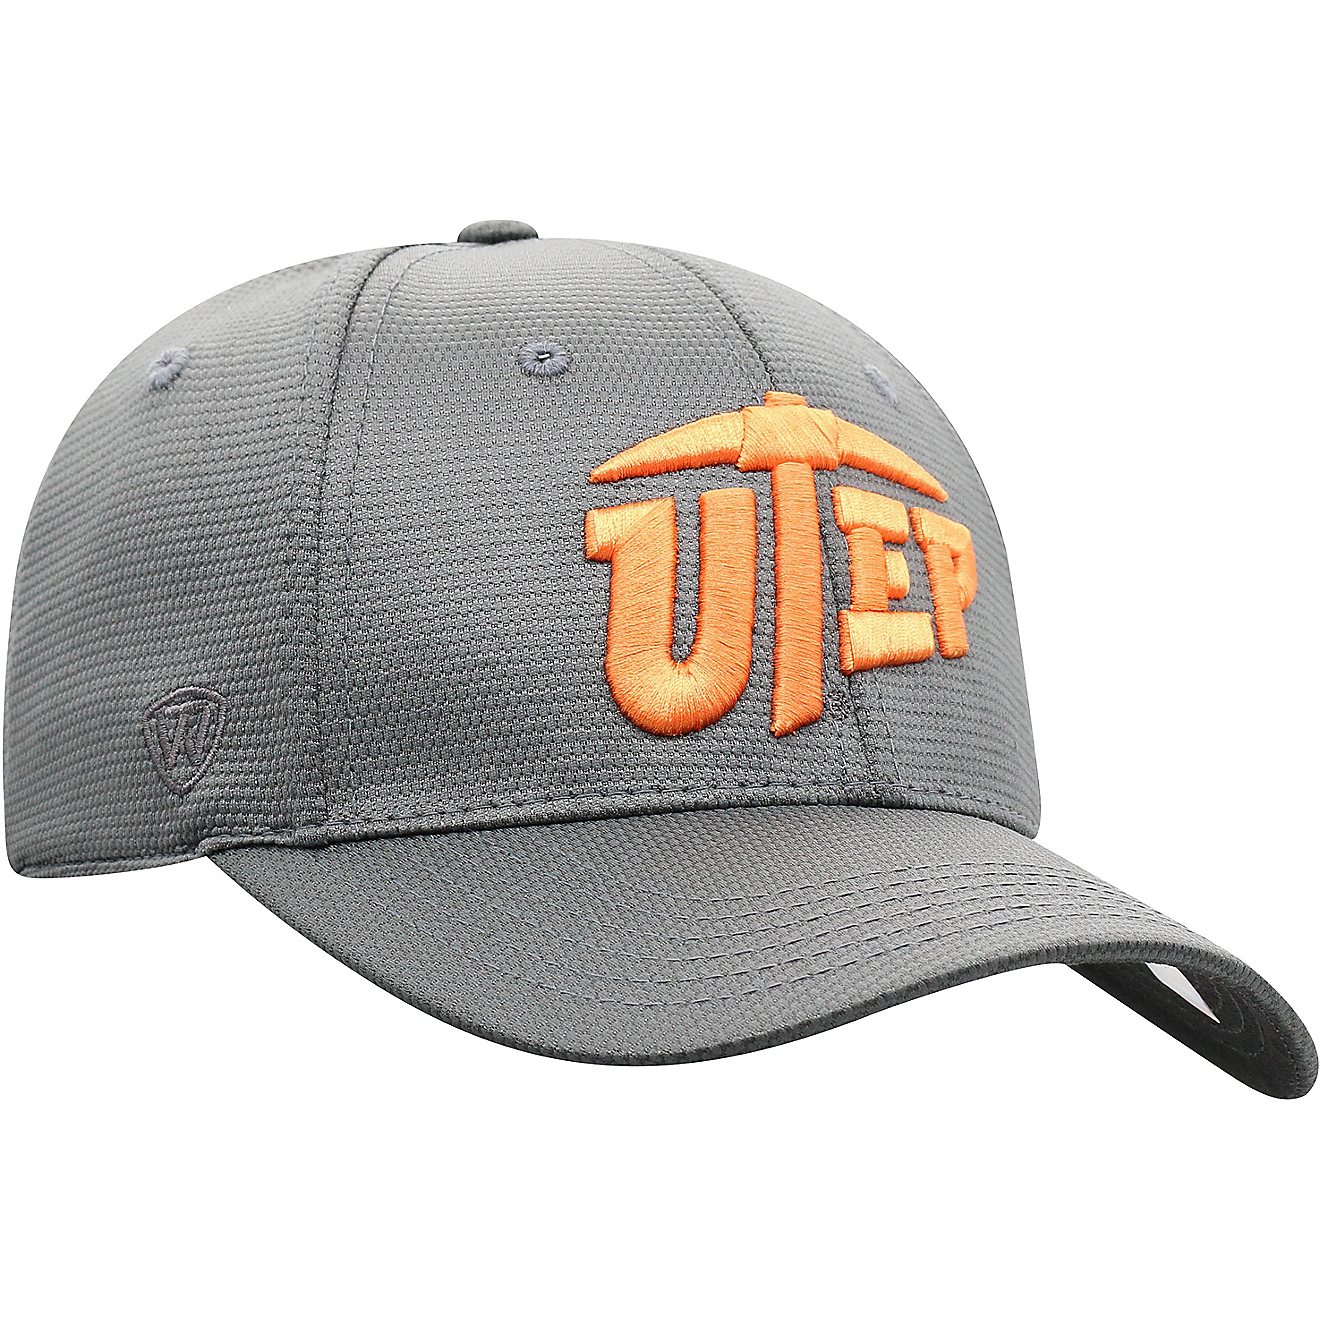 Top of the World Men's University of Texas at El Paso Progo Ball Cap                                                             - view number 3